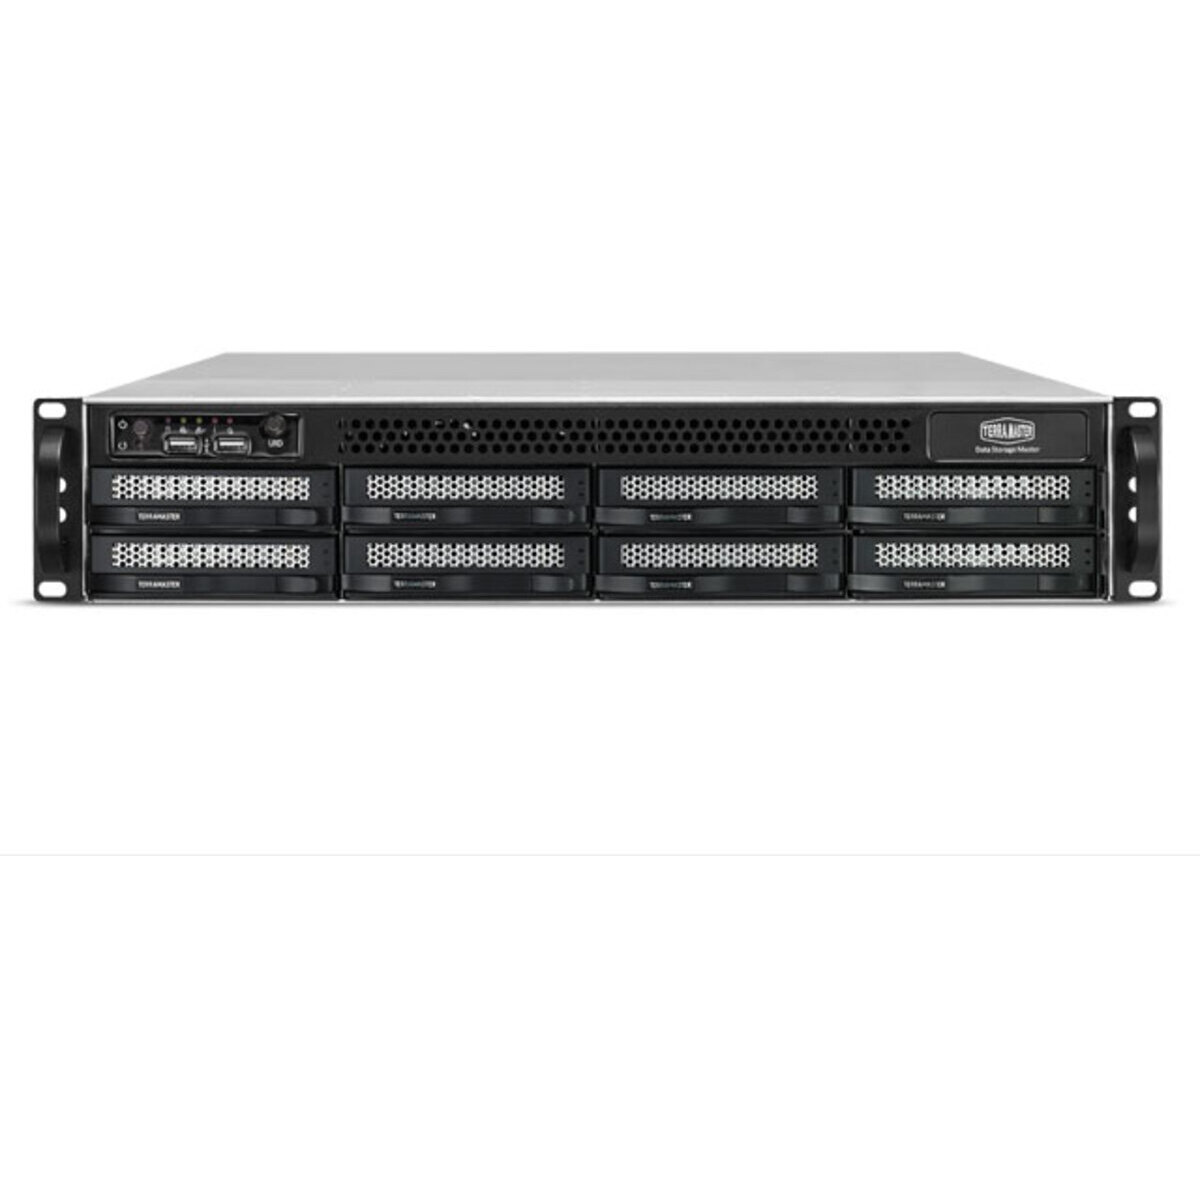 TerraMaster U8-522-9400 48tb 8-Bay RackMount Large Business / Enterprise NAS - Network Attached Storage Device 8x6tb Seagate EXOS 7E10 ST6000NM019B 3.5 7200rpm SATA 6Gb/s HDD ENTERPRISE Class Drives Installed - Burn-In Tested U8-522-9400